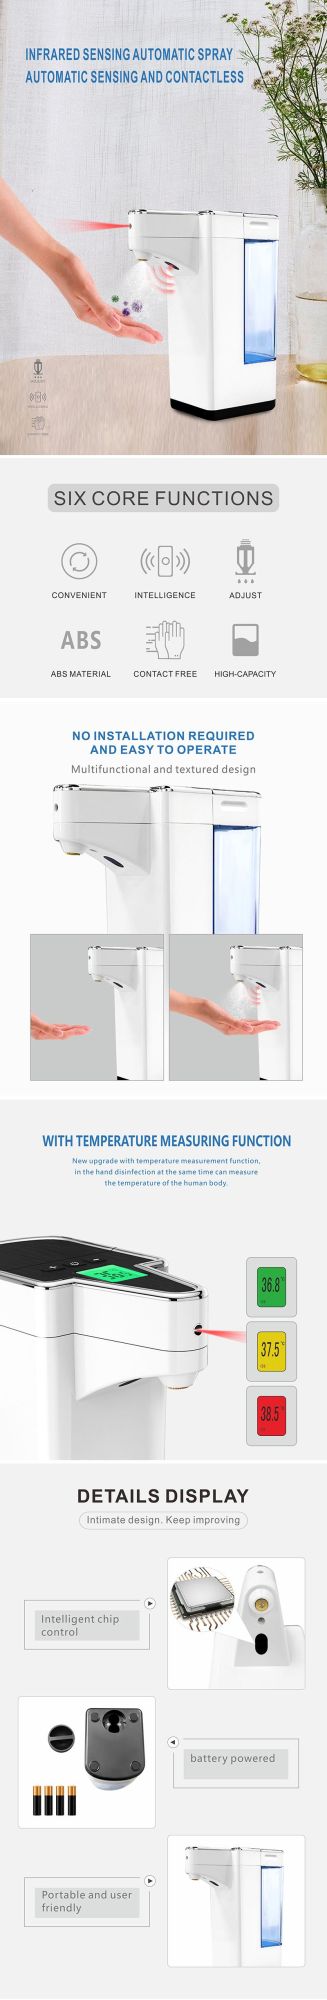 School Office Supermarket Use Non-Contact Infrared Thermometer Automatic Soap Dispenser with Competitive Price